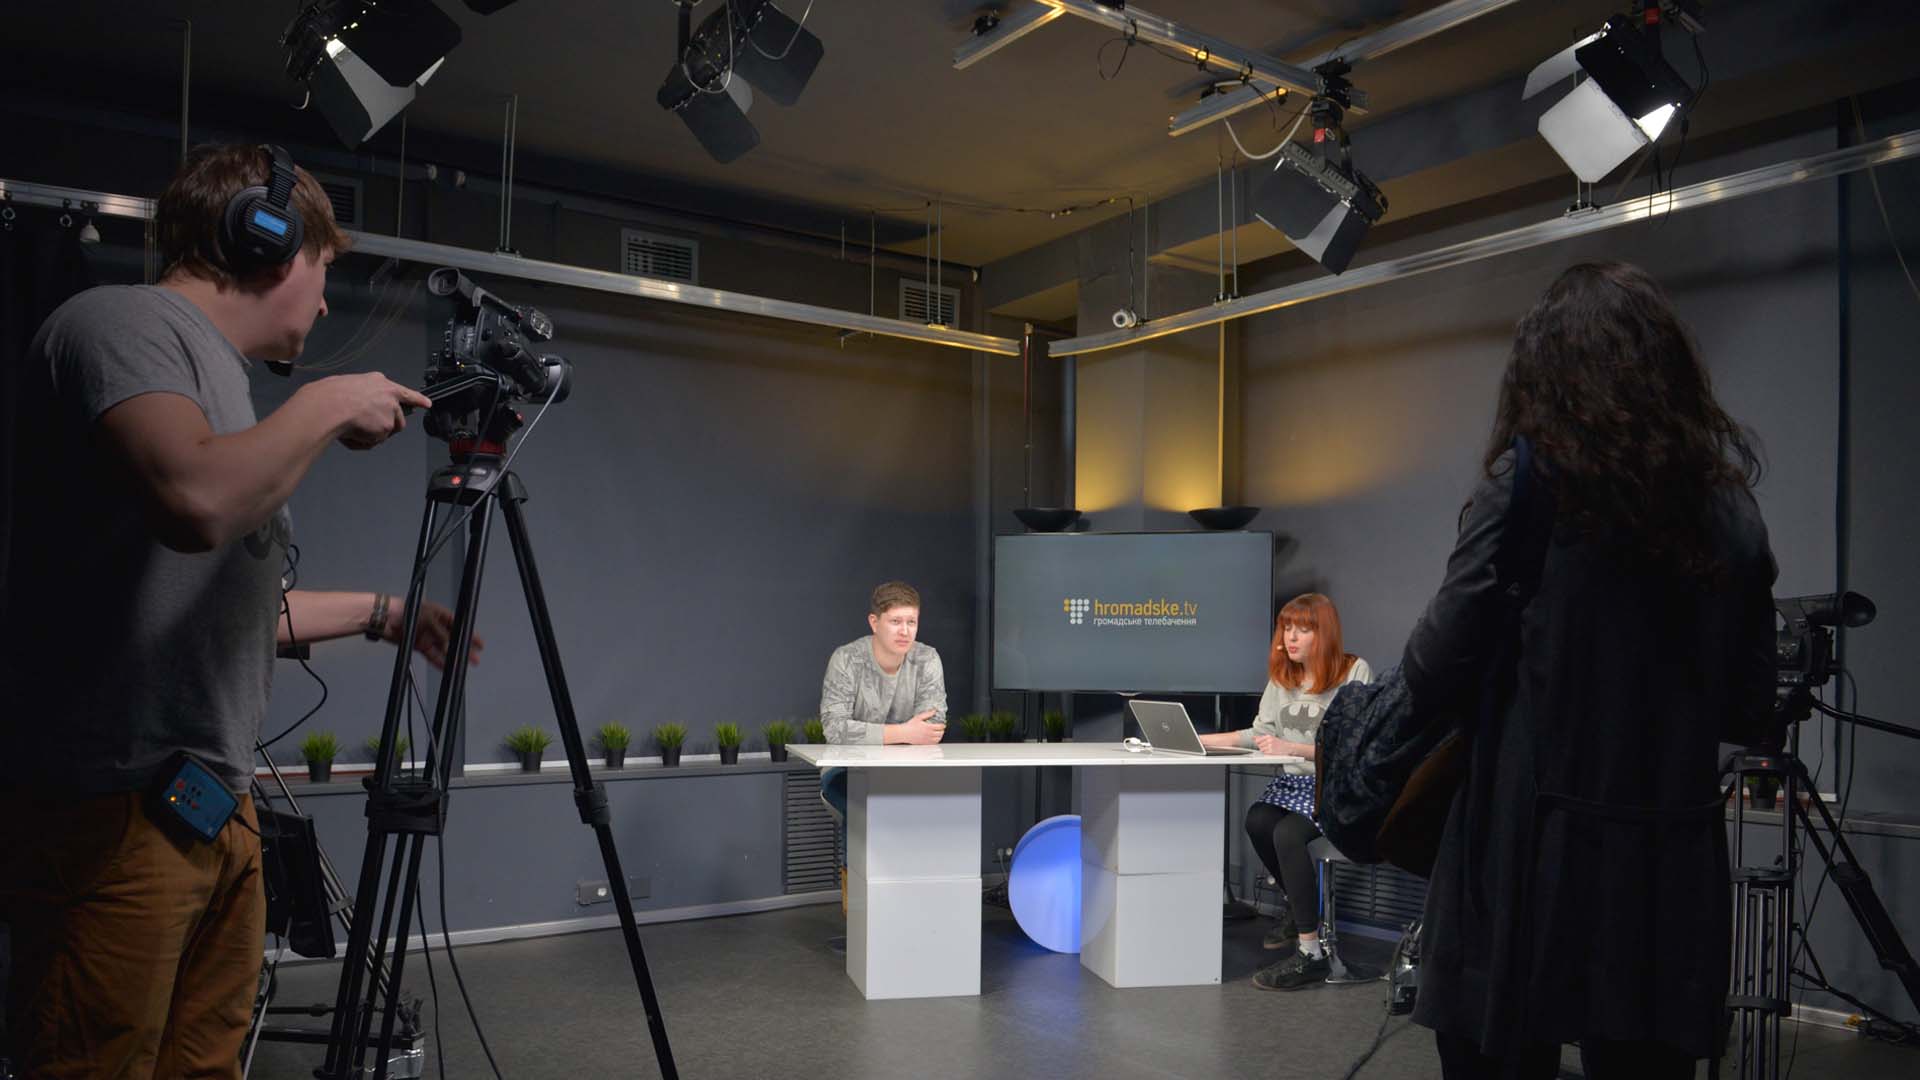 Thomson Foundation consultant David Hands has been guiding Hromadske journalists to produce a documentary about people who are having to start their lives afresh in Ukraine's capital, Kviv